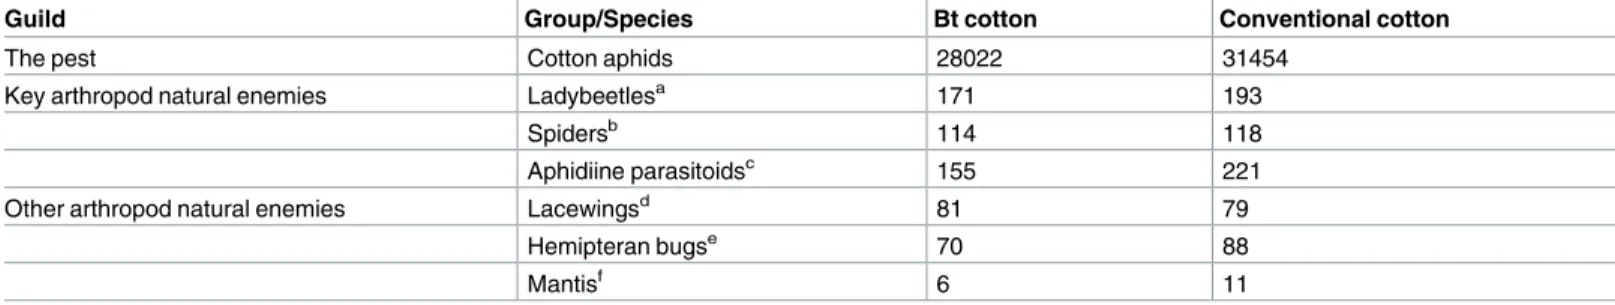 Table 1. A summary of sampled arthropods in the field survey. Total counts of dominant arthropods in the experimental plots of Bt cotton or conventional cotton at HZAU experimental station (Wuhan, China) from late June to late August in 2013.